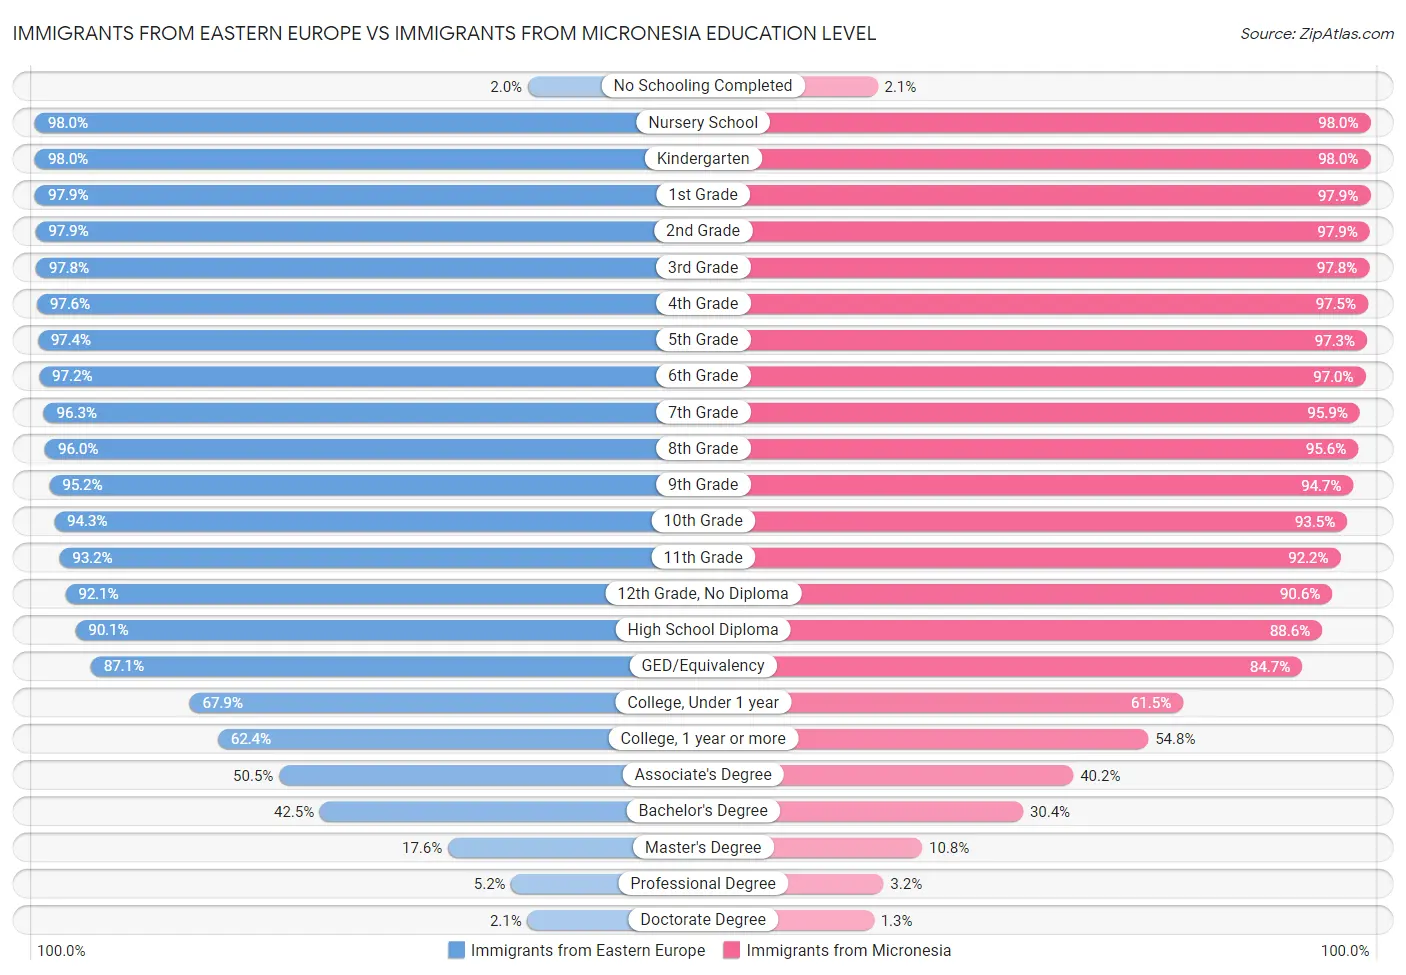 Immigrants from Eastern Europe vs Immigrants from Micronesia Education Level